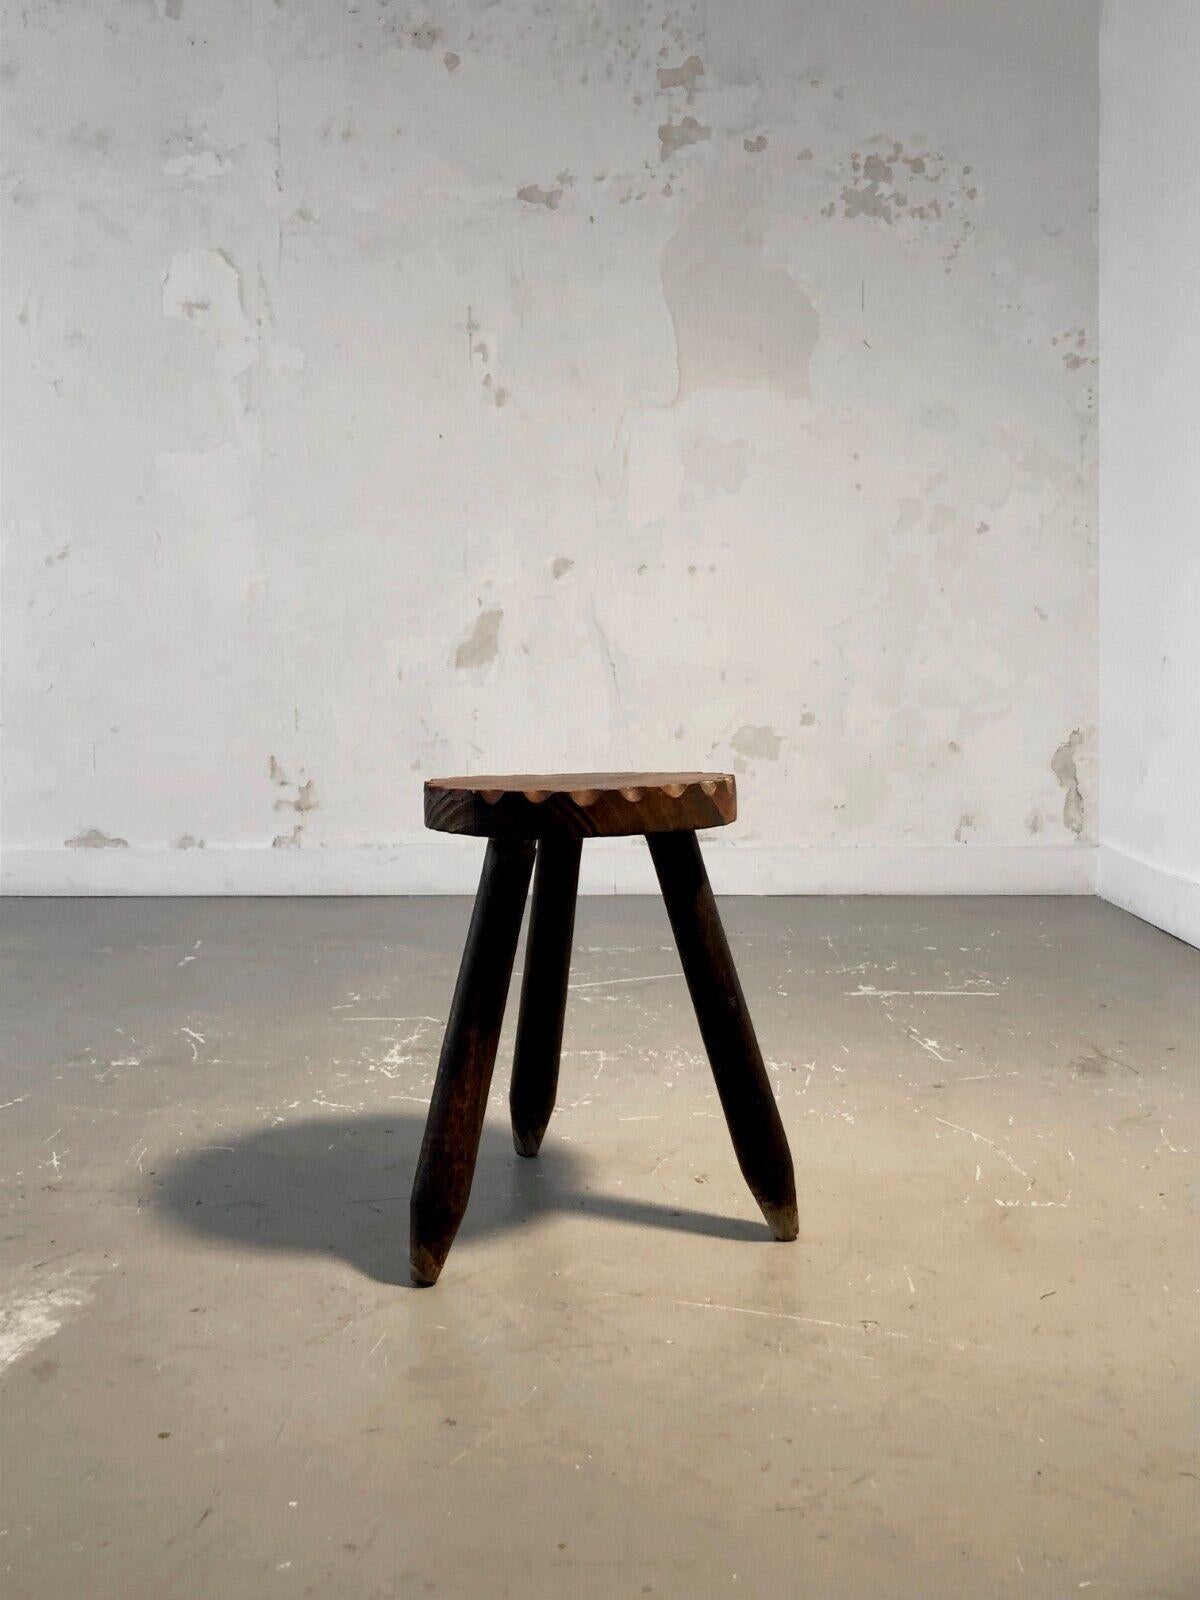 A BRUTALIST MID-CENTURY-MODERN RUSTIC STOOL, MAROLLES Style, France 1950 For Sale 3